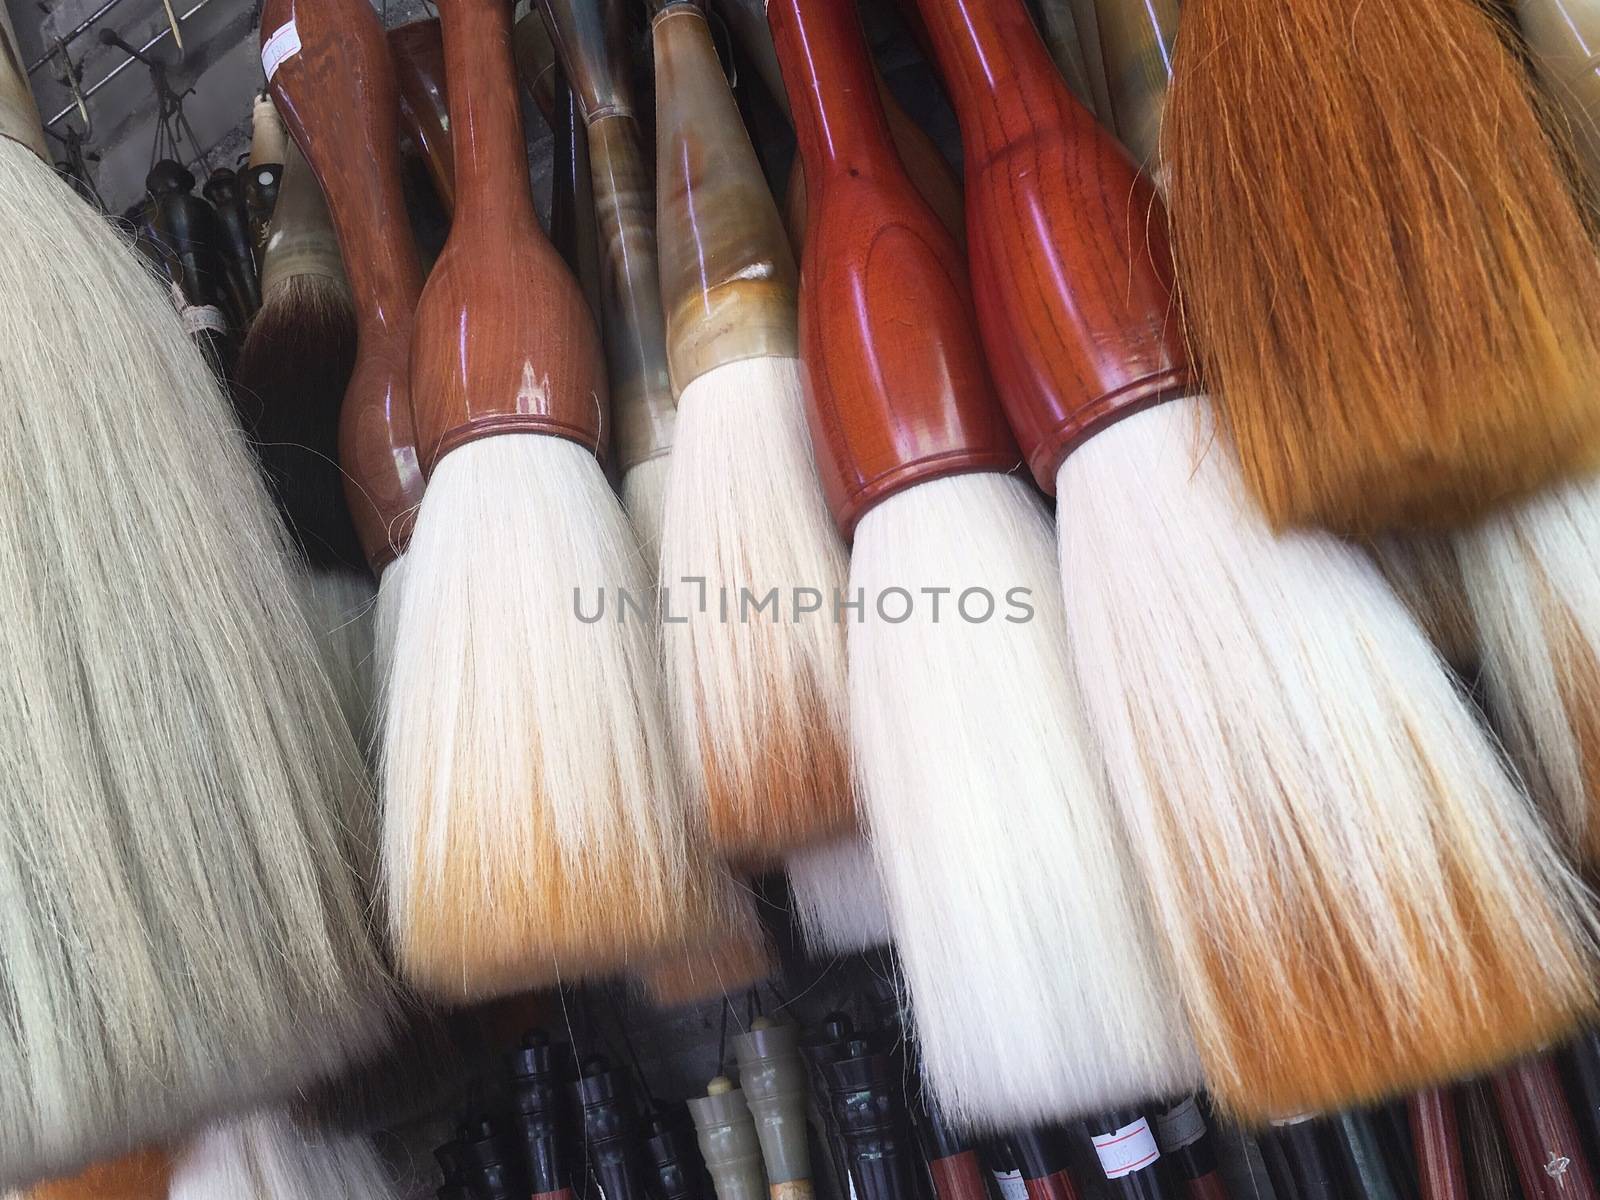 Closeup of Chinese calligraphy brushes. Set of Zen calligraphy brushes, paintbrush s, writing brushes use for writing Chinese, Japanese, Korean lettering.